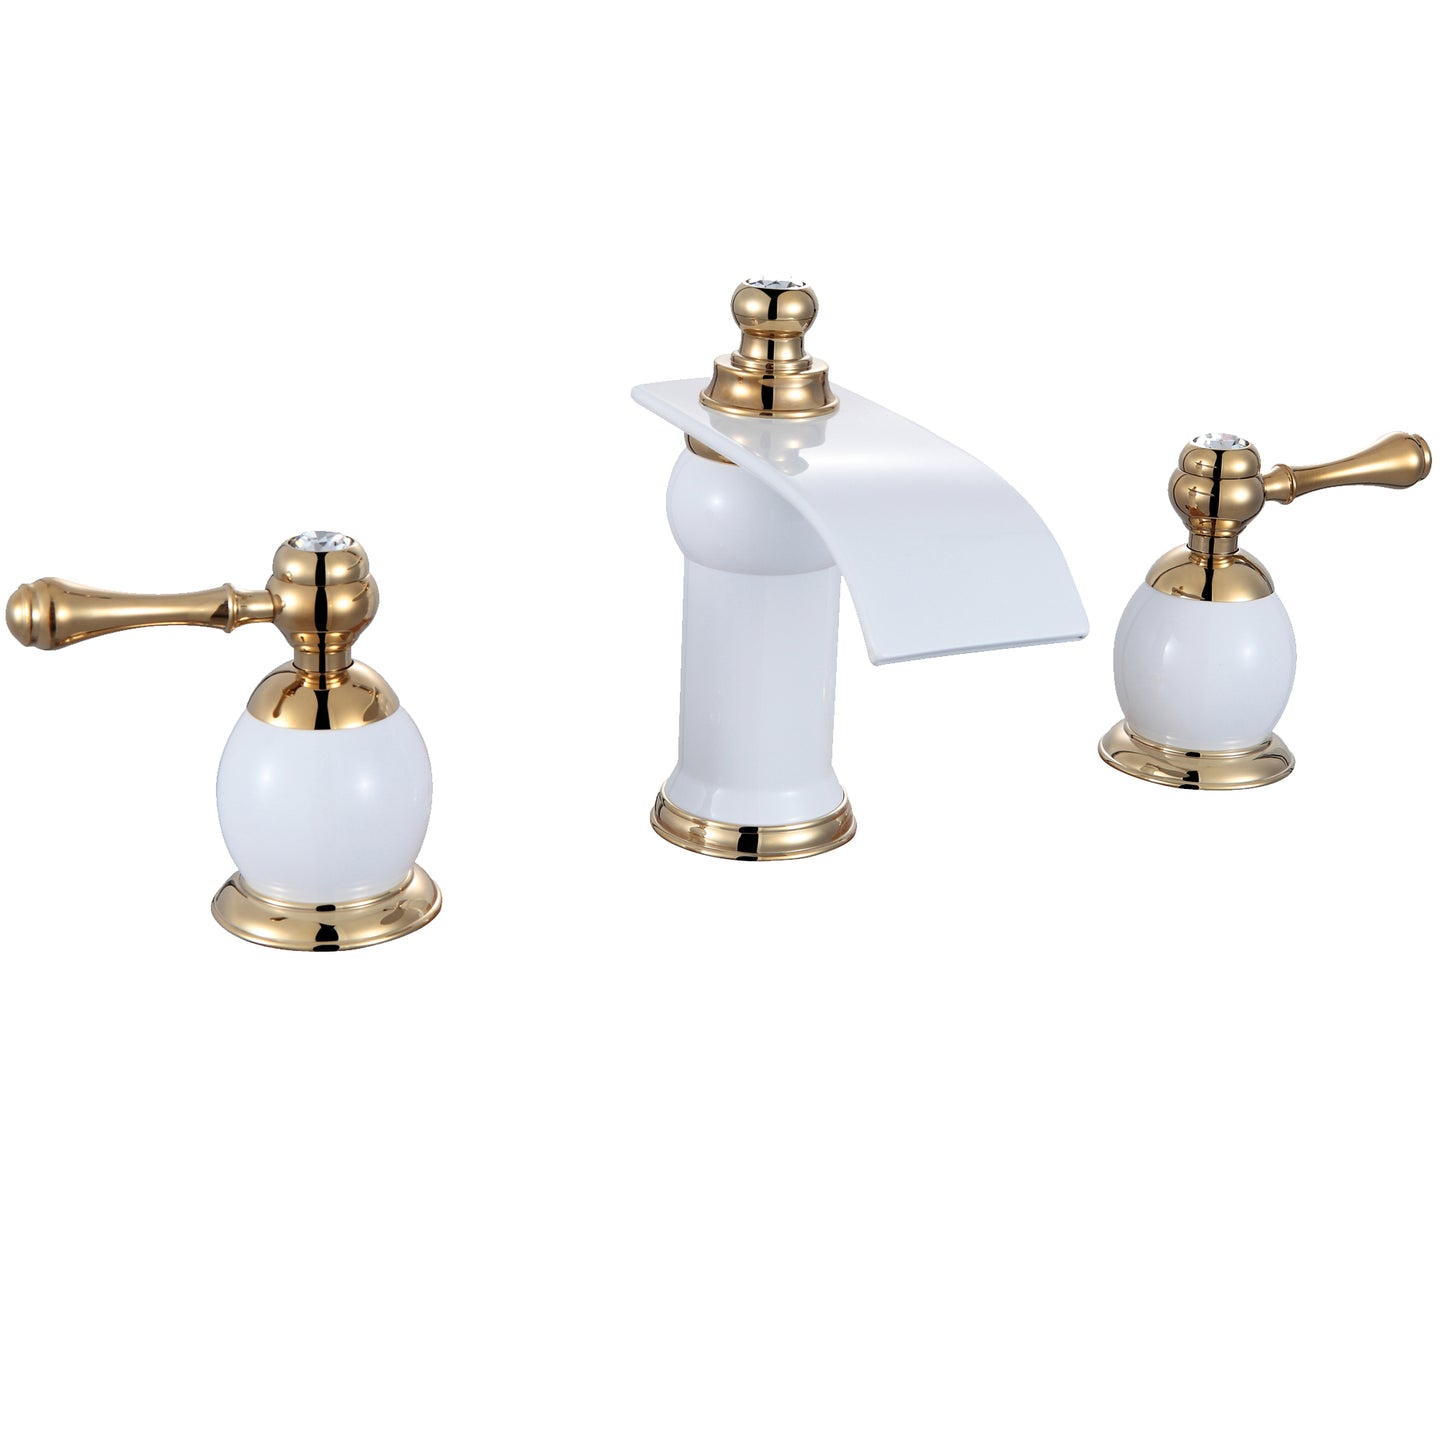 Angelo 3 Hole Contemporary Widespread Bathroom Faucet White/Gold-M145G/W